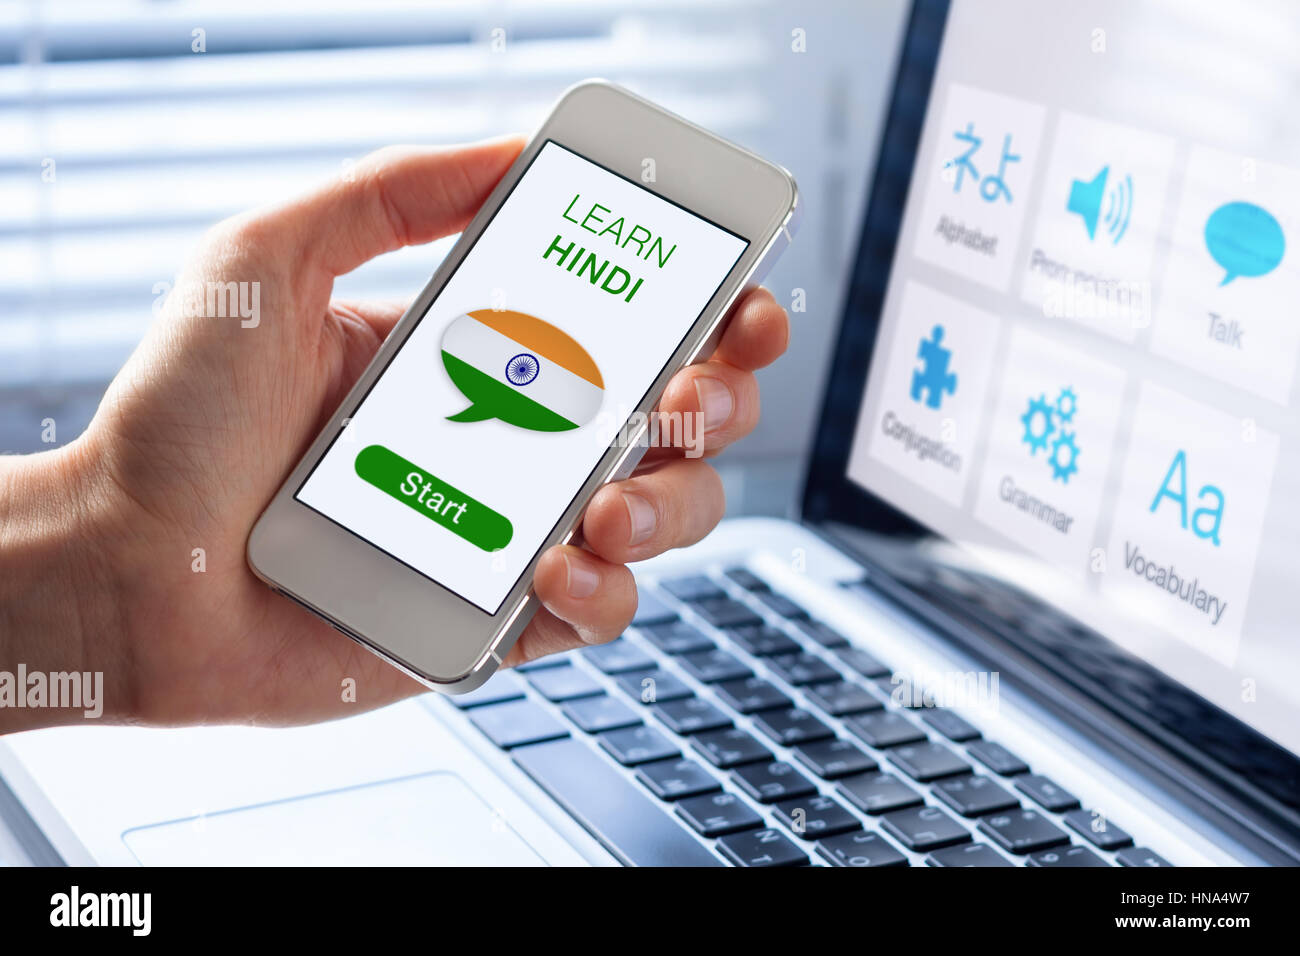 Learn Hindi language online concept with a person showing e-learning app on mobile phone with the flag of India Stock Photo